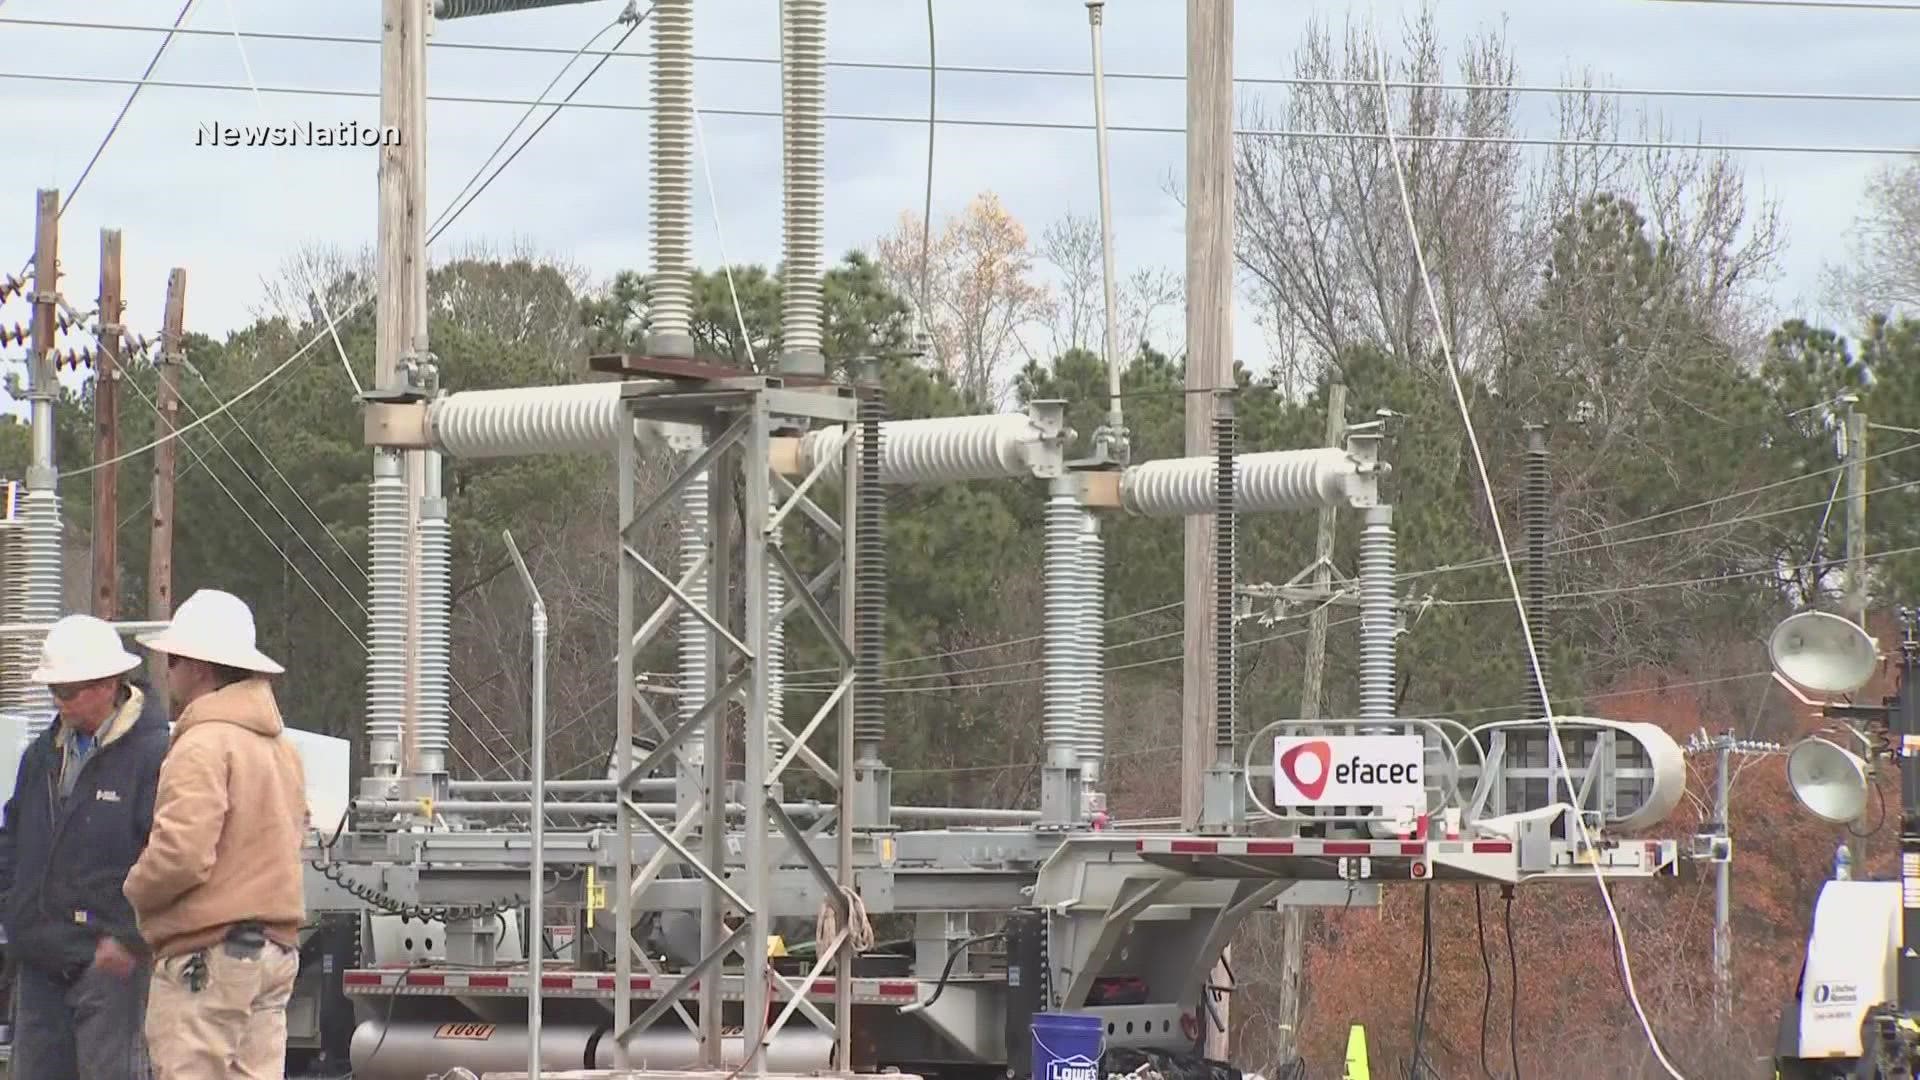 Power is back on for Moore County after someone shot up two Duke Energy substations, knocking lights out for nearly 40,000 customers across the county.